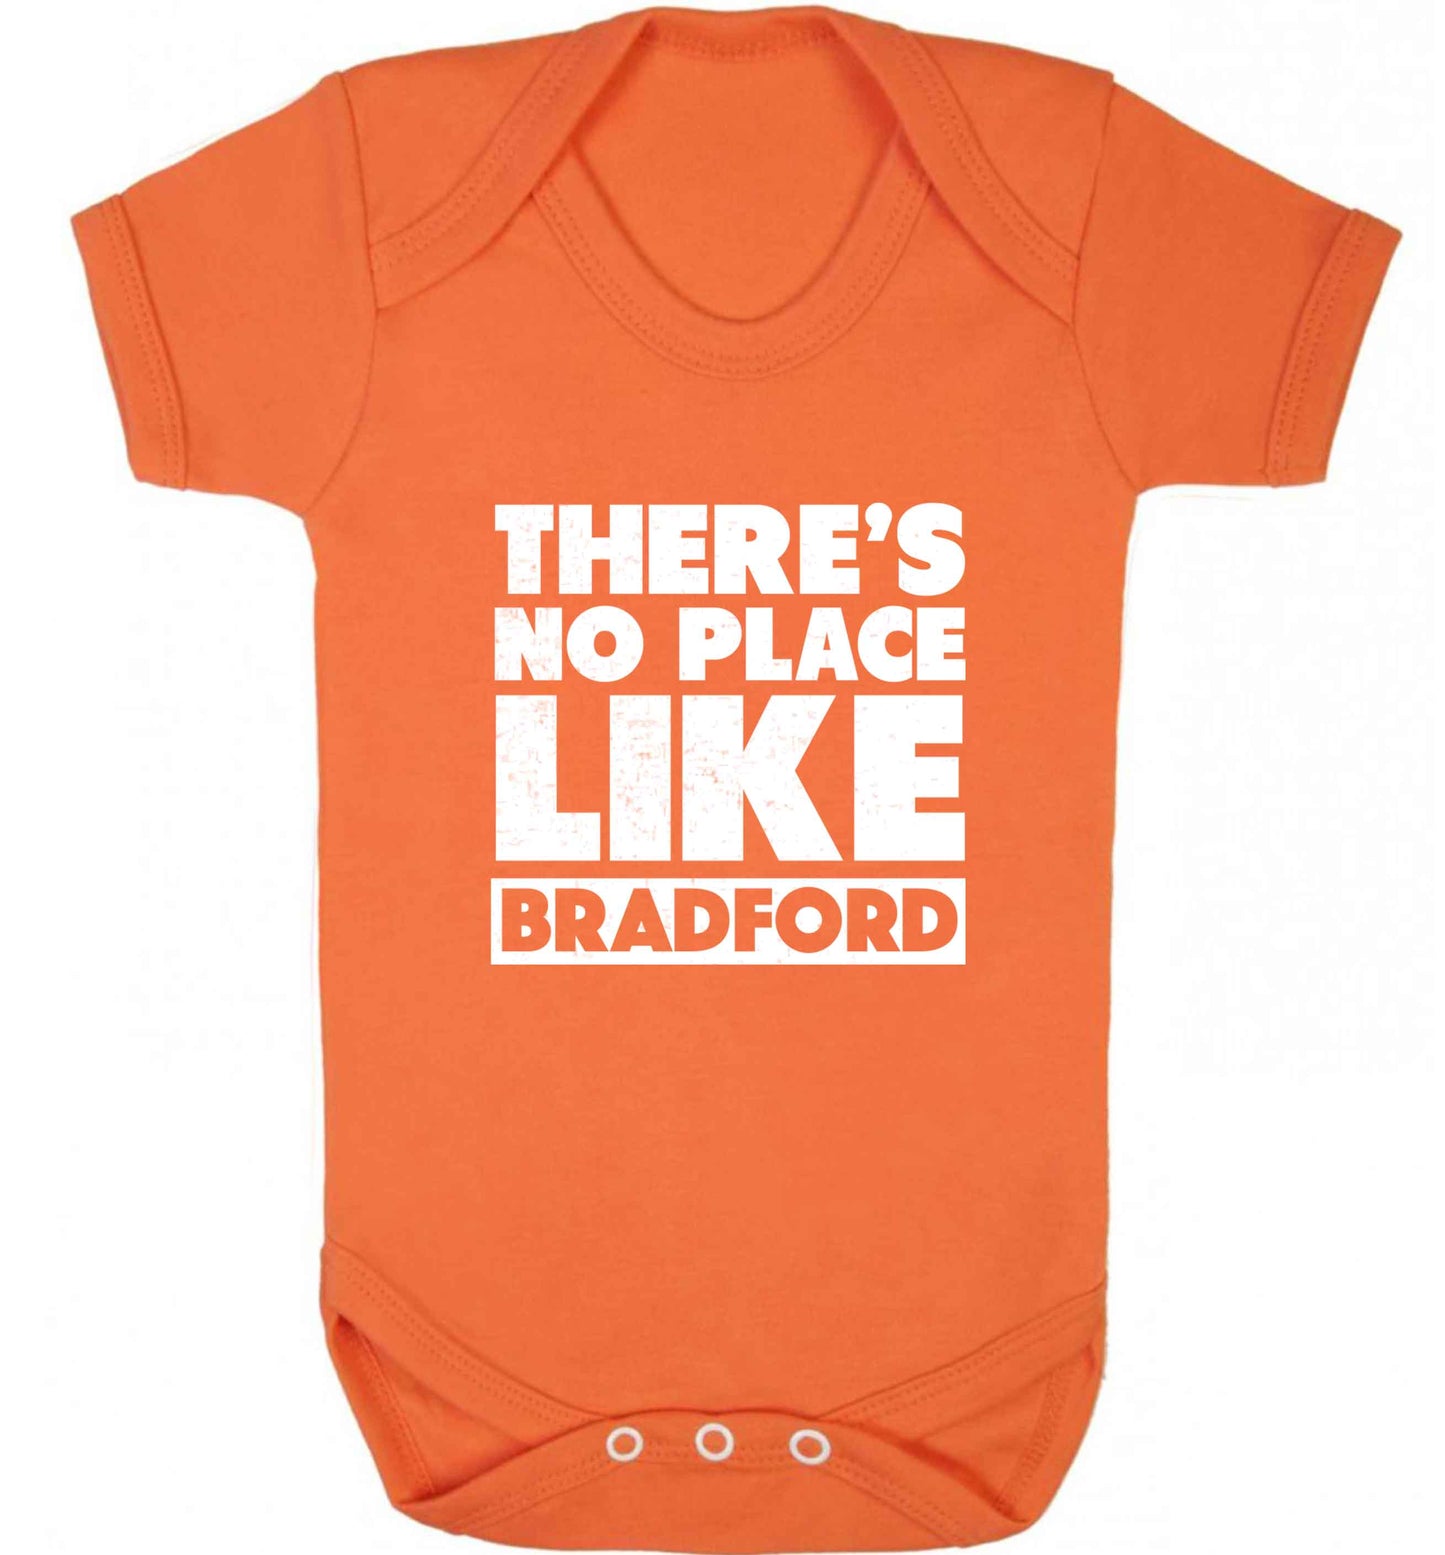 There's no place like Bradford baby vest orange 18-24 months